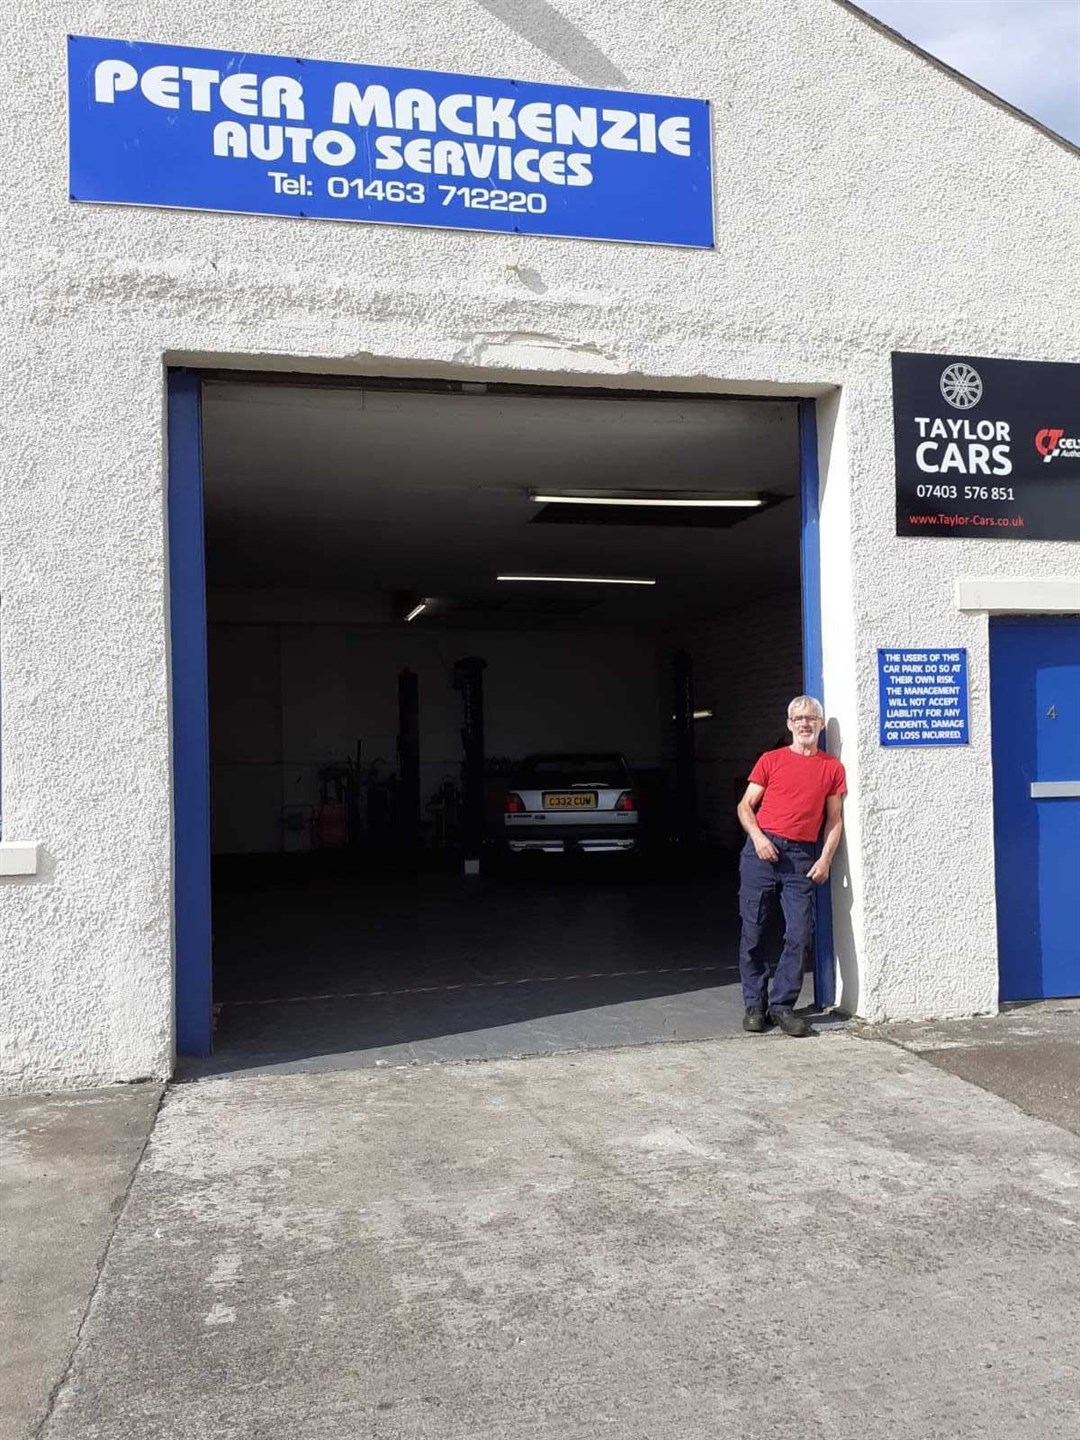 Peter Mackenzie at Auto Services.